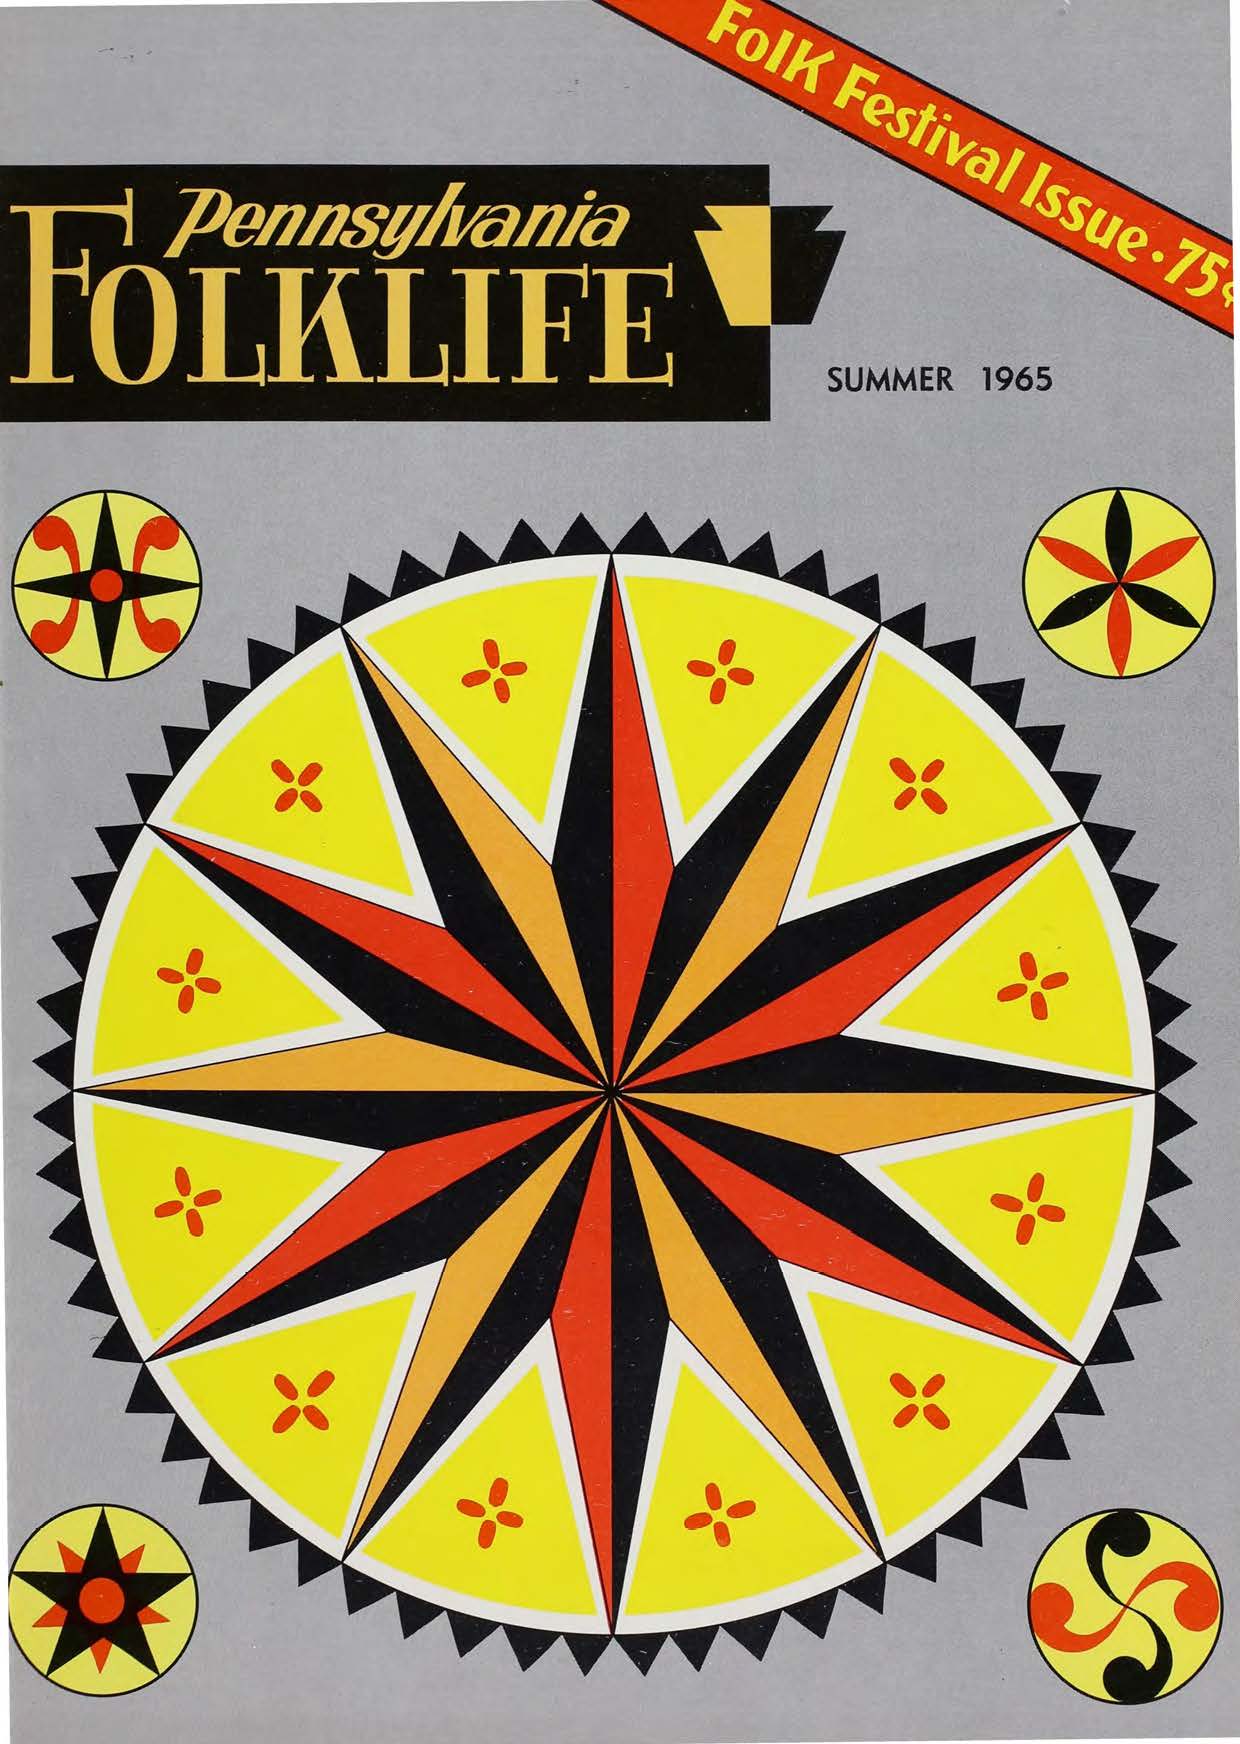 The cover of a "Pennsylvania Folklife" magazine. The background is gray, and features a large 12-pointed hex sign design in yellow, red, black, and orange. There are four small additional hex signs that are different star patterns in the same four colors.